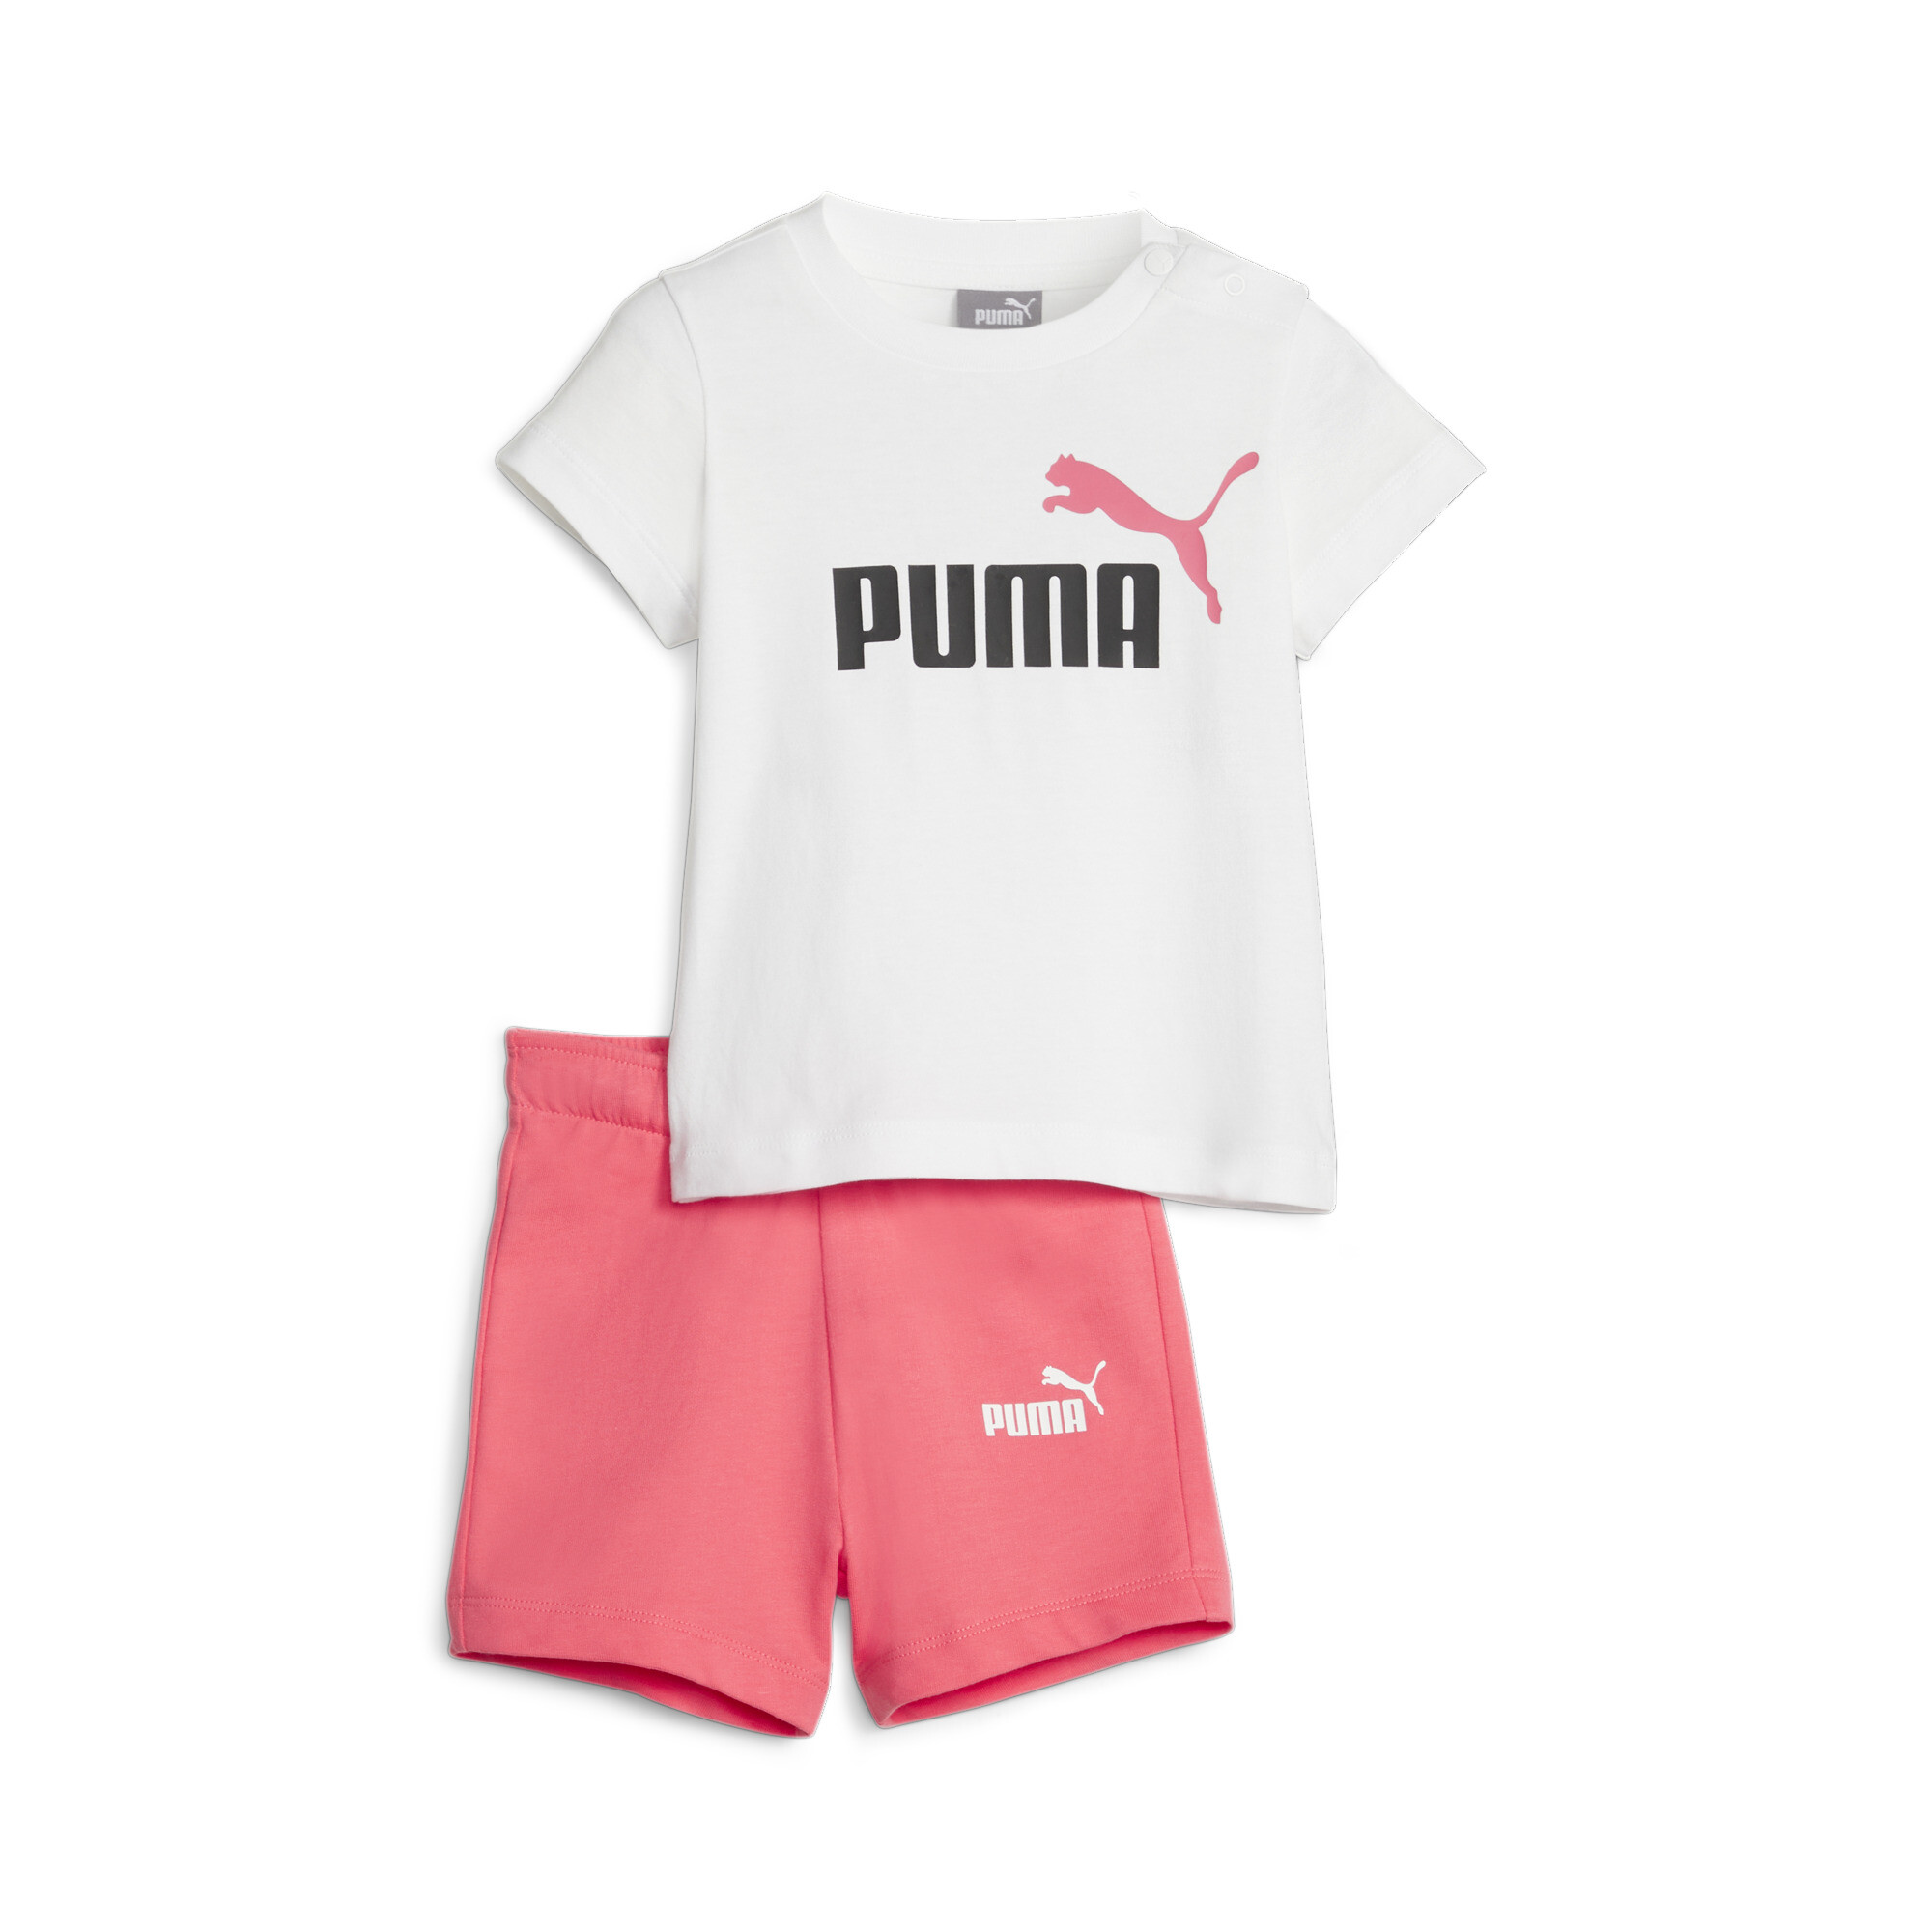 PUMA Minicats T-Shirt And Shorts Babies' Set In Pink, Size 3-4 Youth